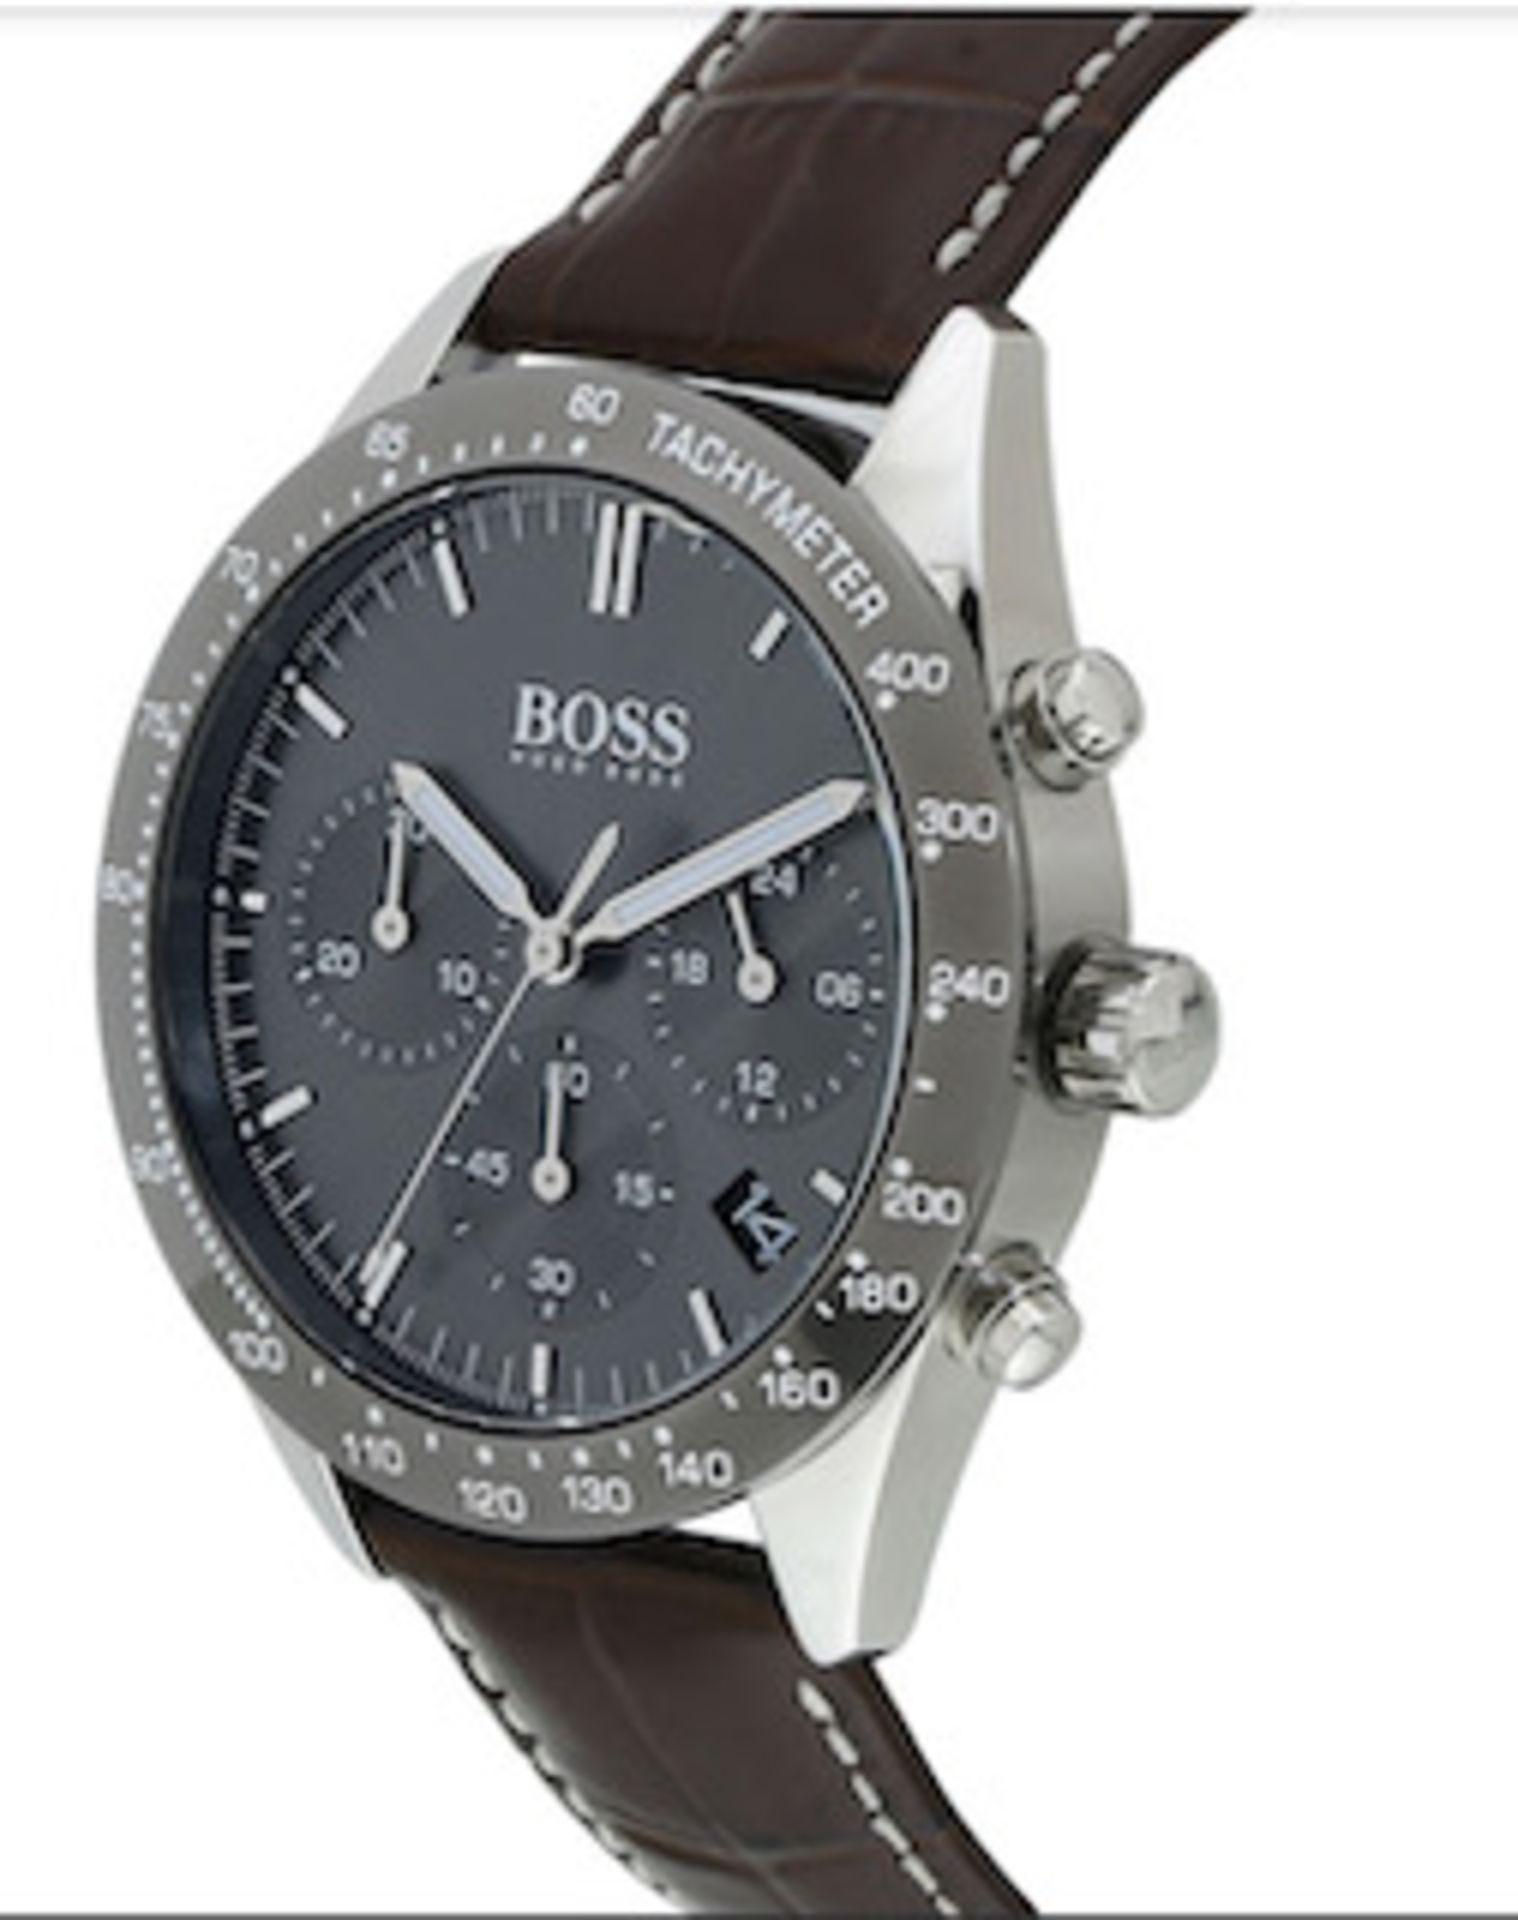 Hugo Boss 1513598 Men's Talent Brown Leather Strap Chronograph Watch - Image 4 of 6